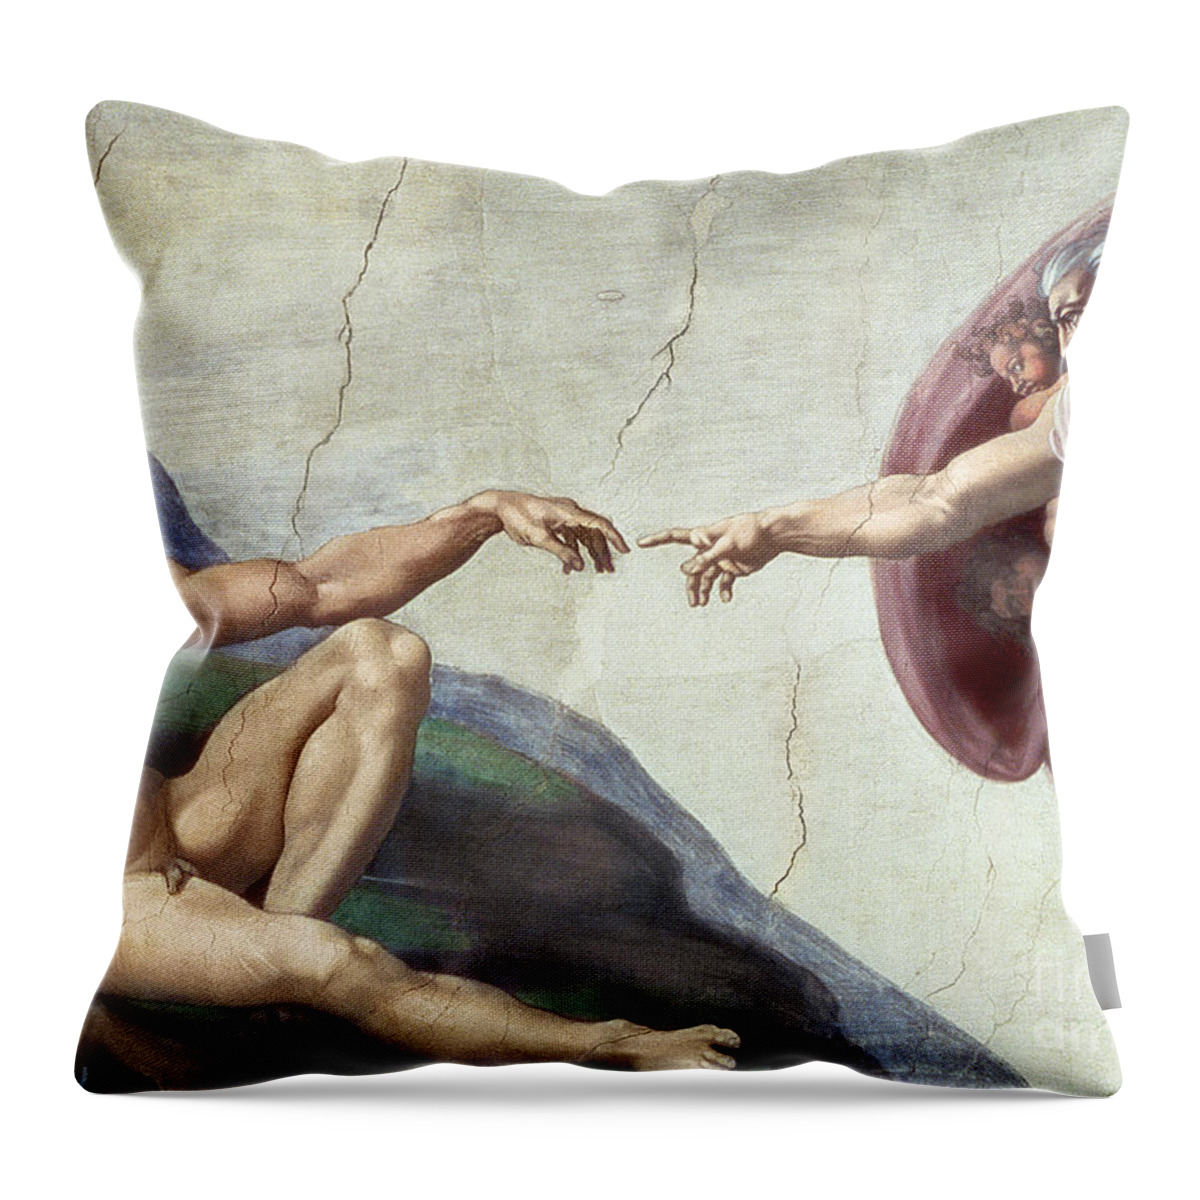 Renaissance Throw Pillow featuring the painting Sistine Chapel Ceiling by Michelangelo Buonarroti